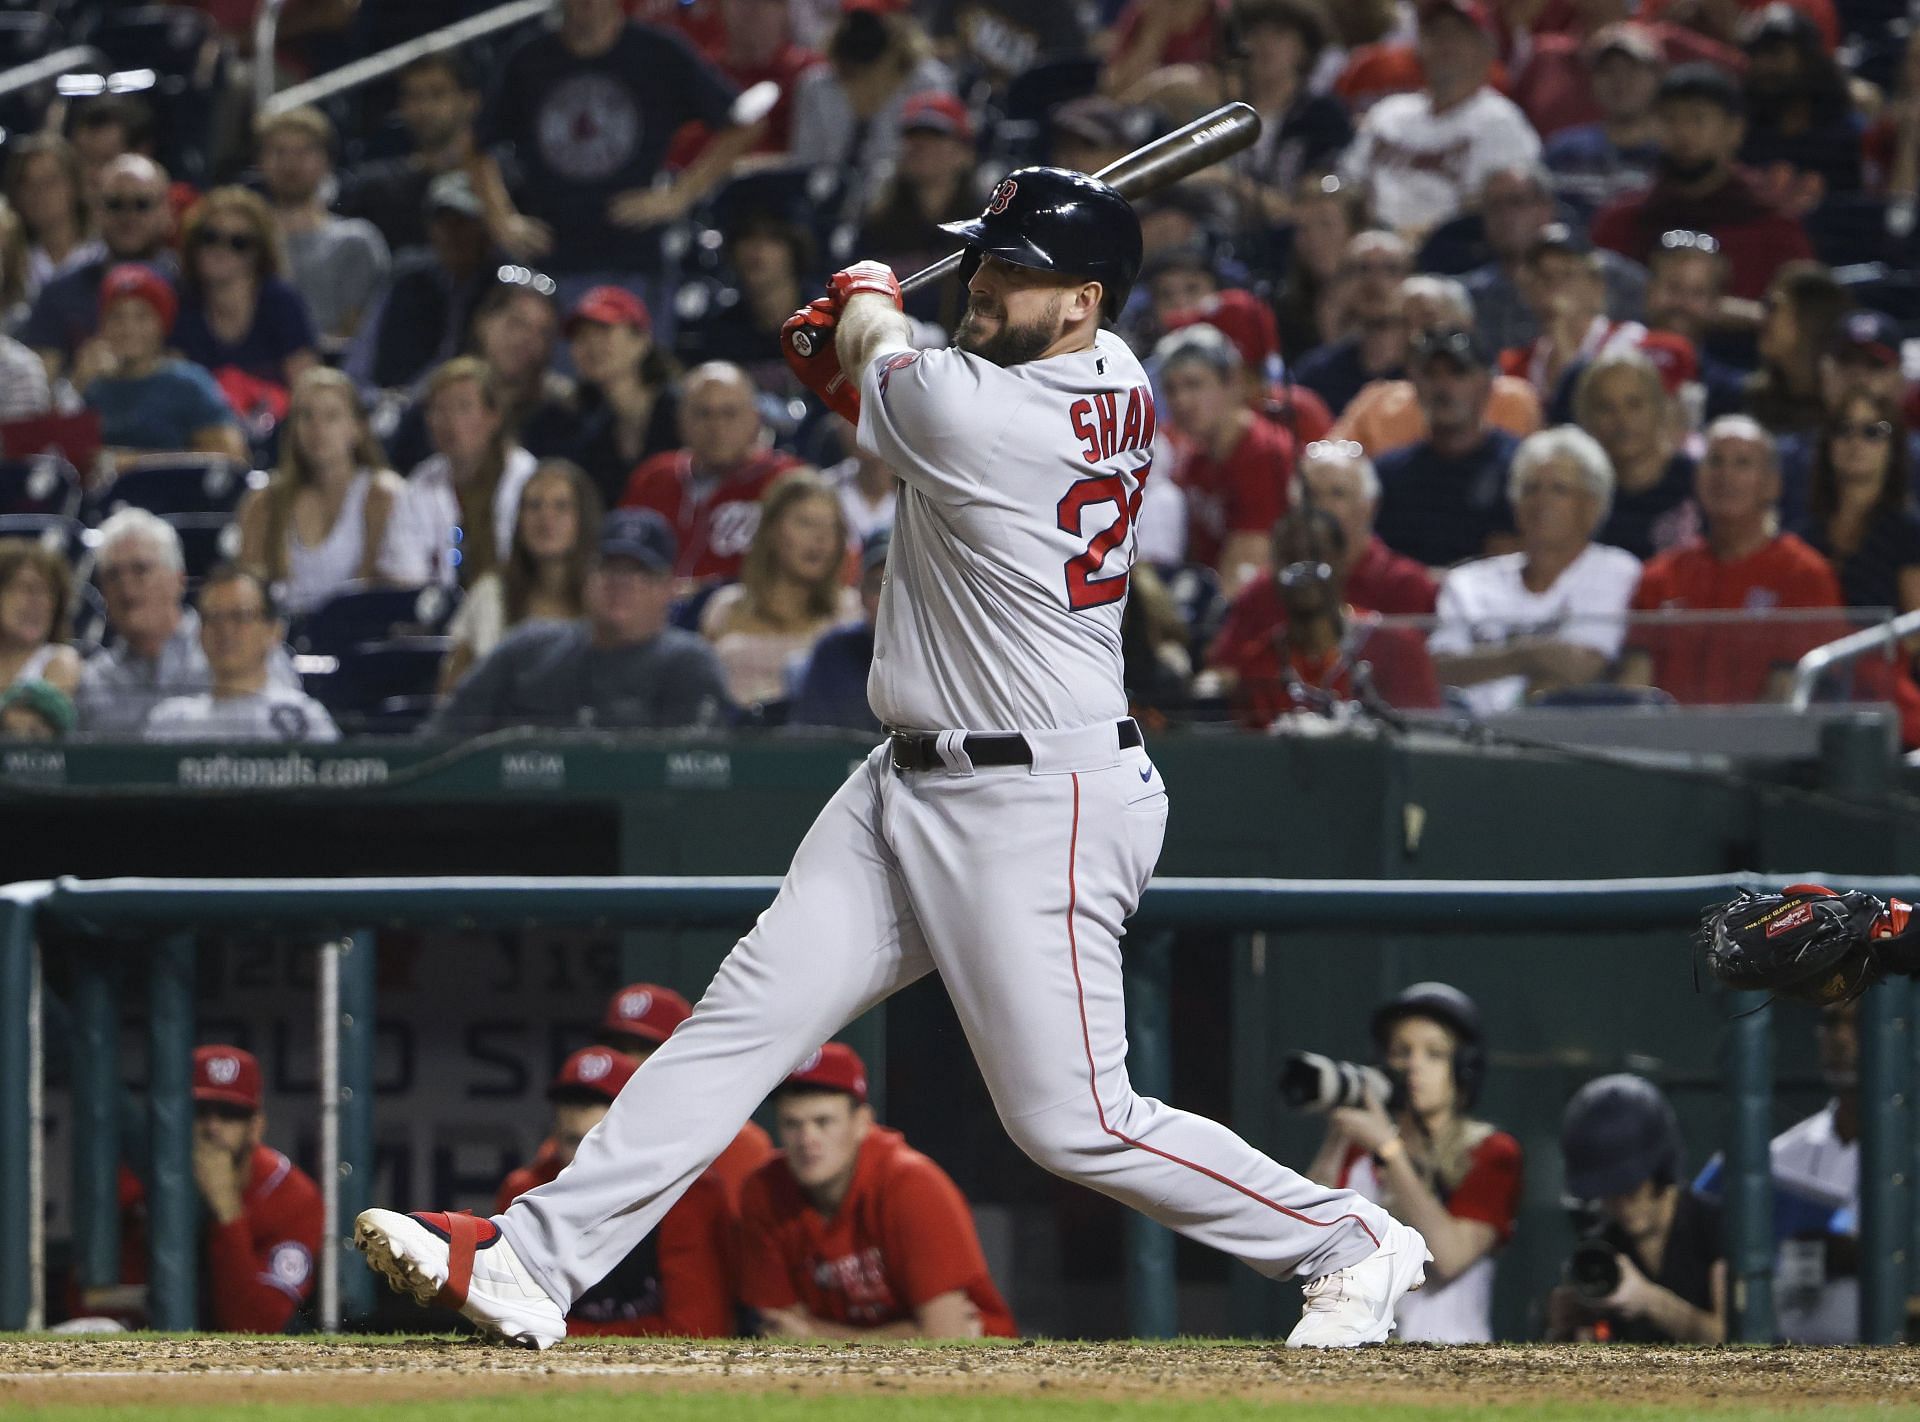 Travis Shaw swings at a pitch during a Boston Red Sox v Washington Nationals game.